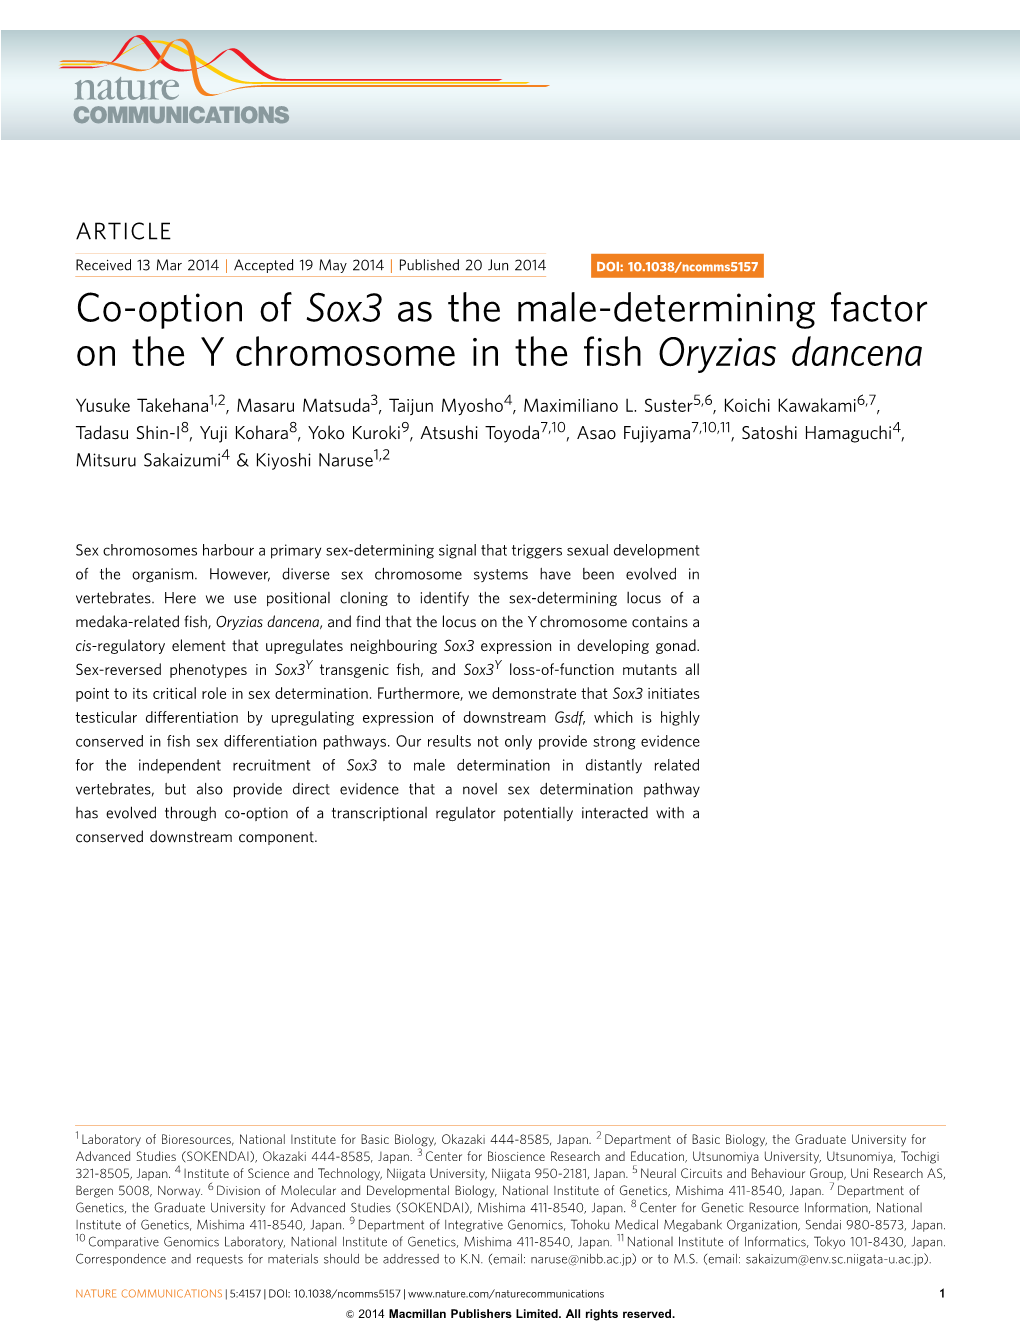 Co-Option of Sox3 As the Male-Determining Factor on the Y Chromosome in the ﬁsh Oryzias Dancena